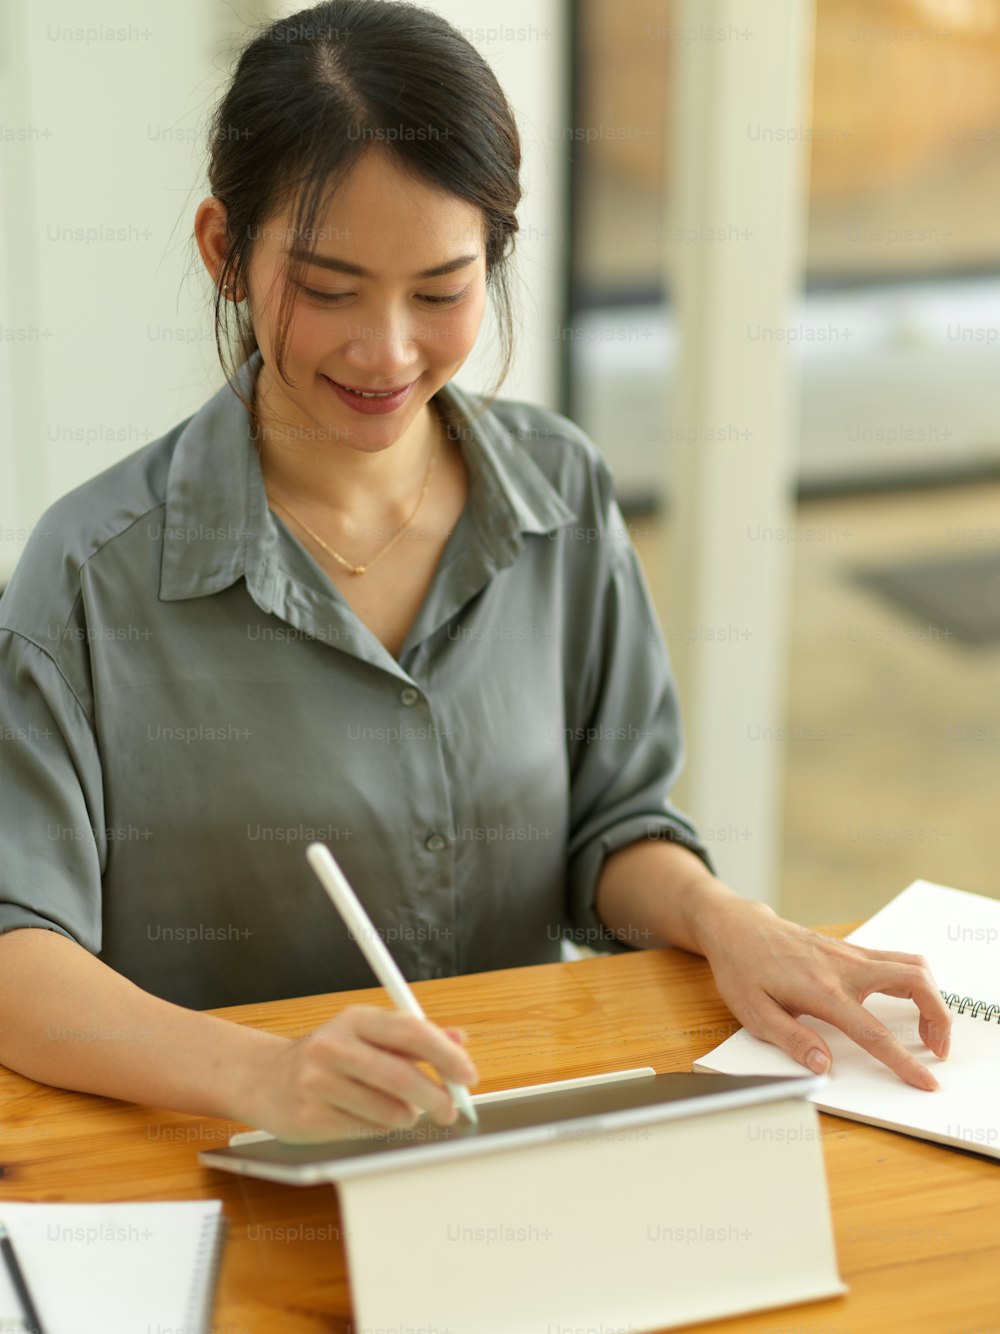 Portrait of smiling female office worker working on digital tablet with stylus pen on wooden table